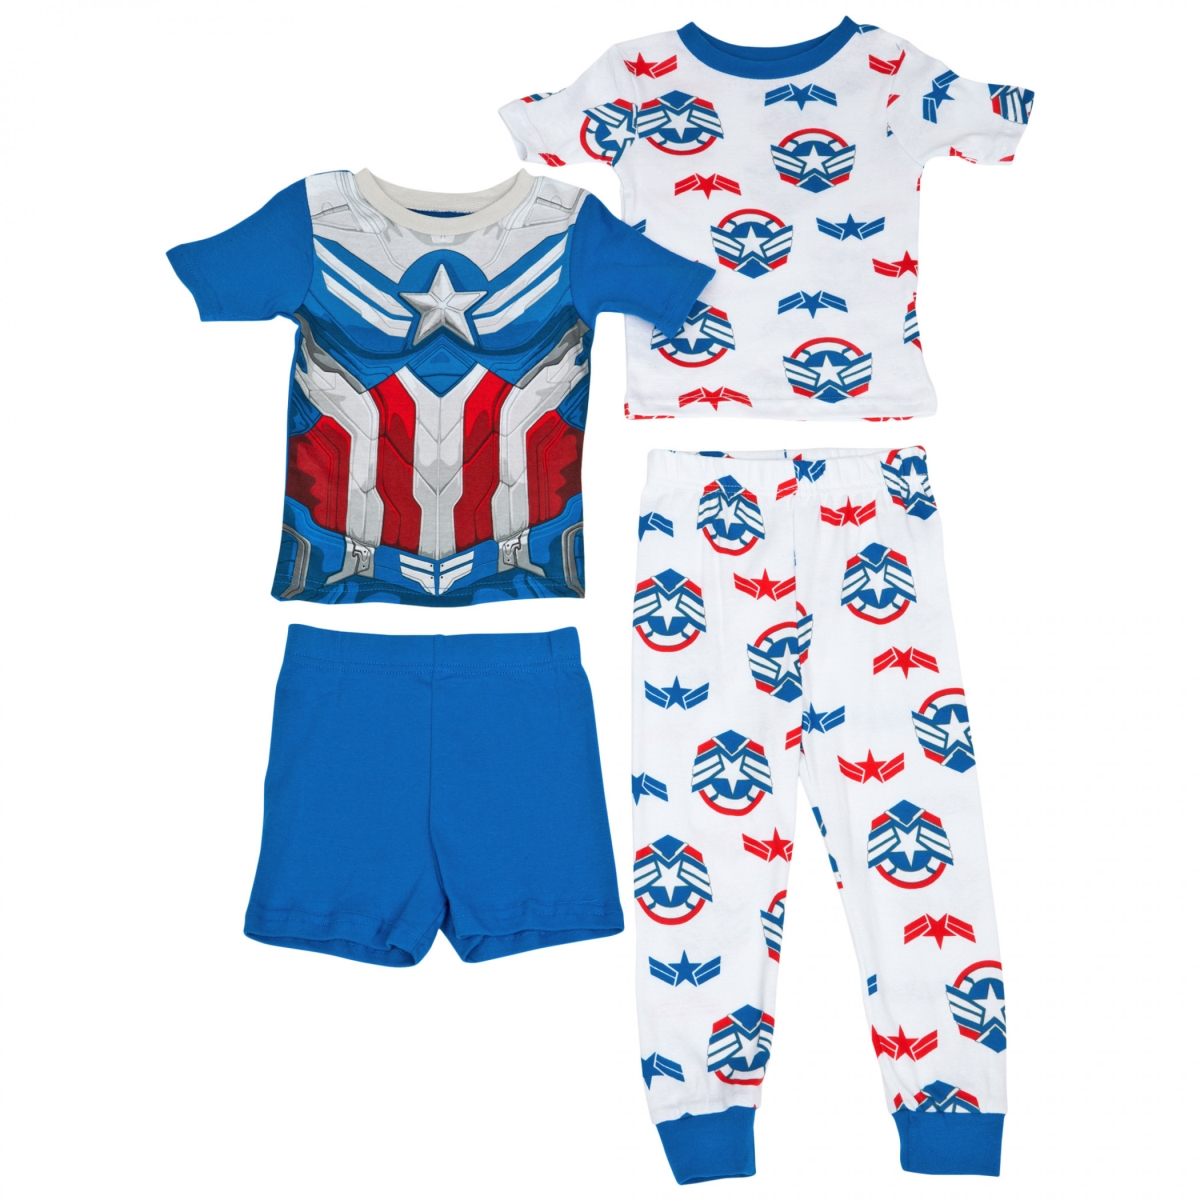 Picture of Captain America 838712-size6 Captain America Youth Shirts Shorts & Pants Set - Size 6 - 4 Piece